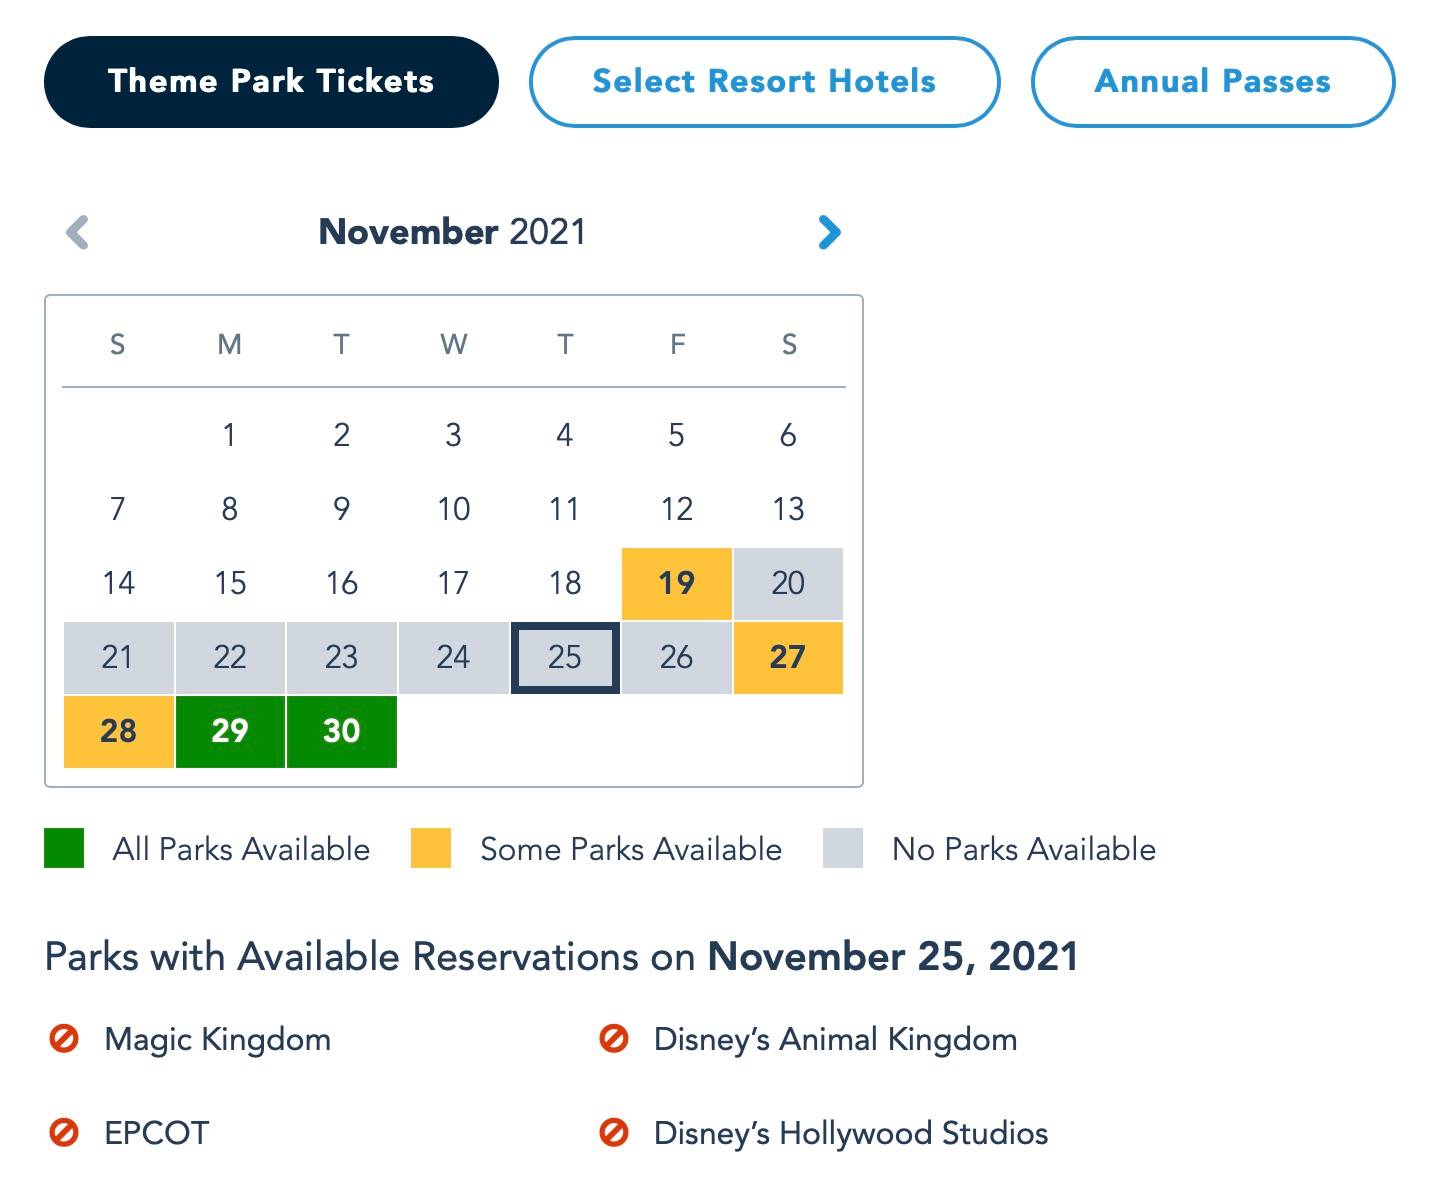 Guests have to navigate the Disney Park Pass system before visiting the parks